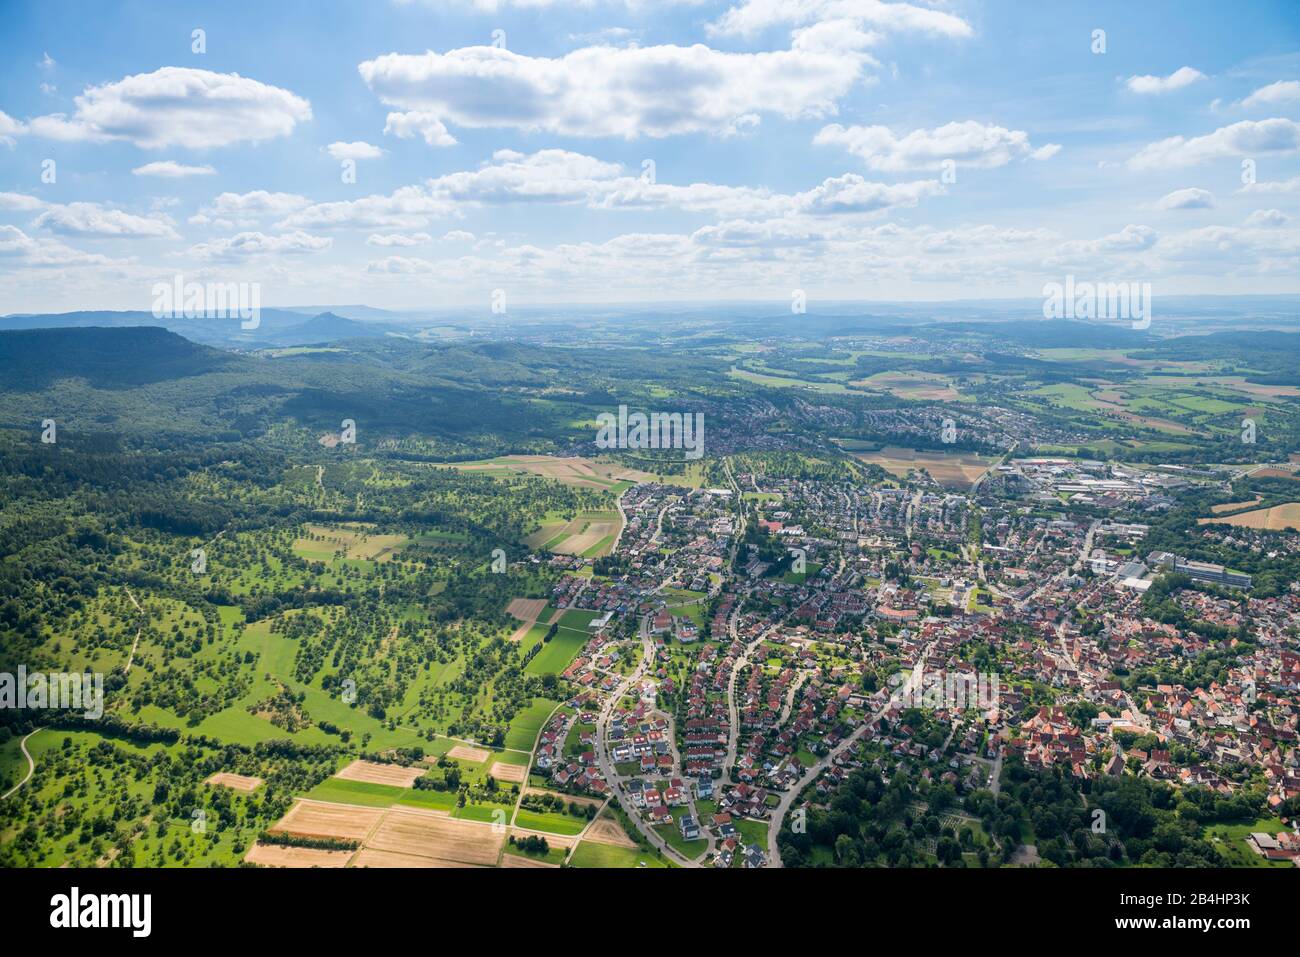 Aerial view of a city in southern Germany Stock Photo